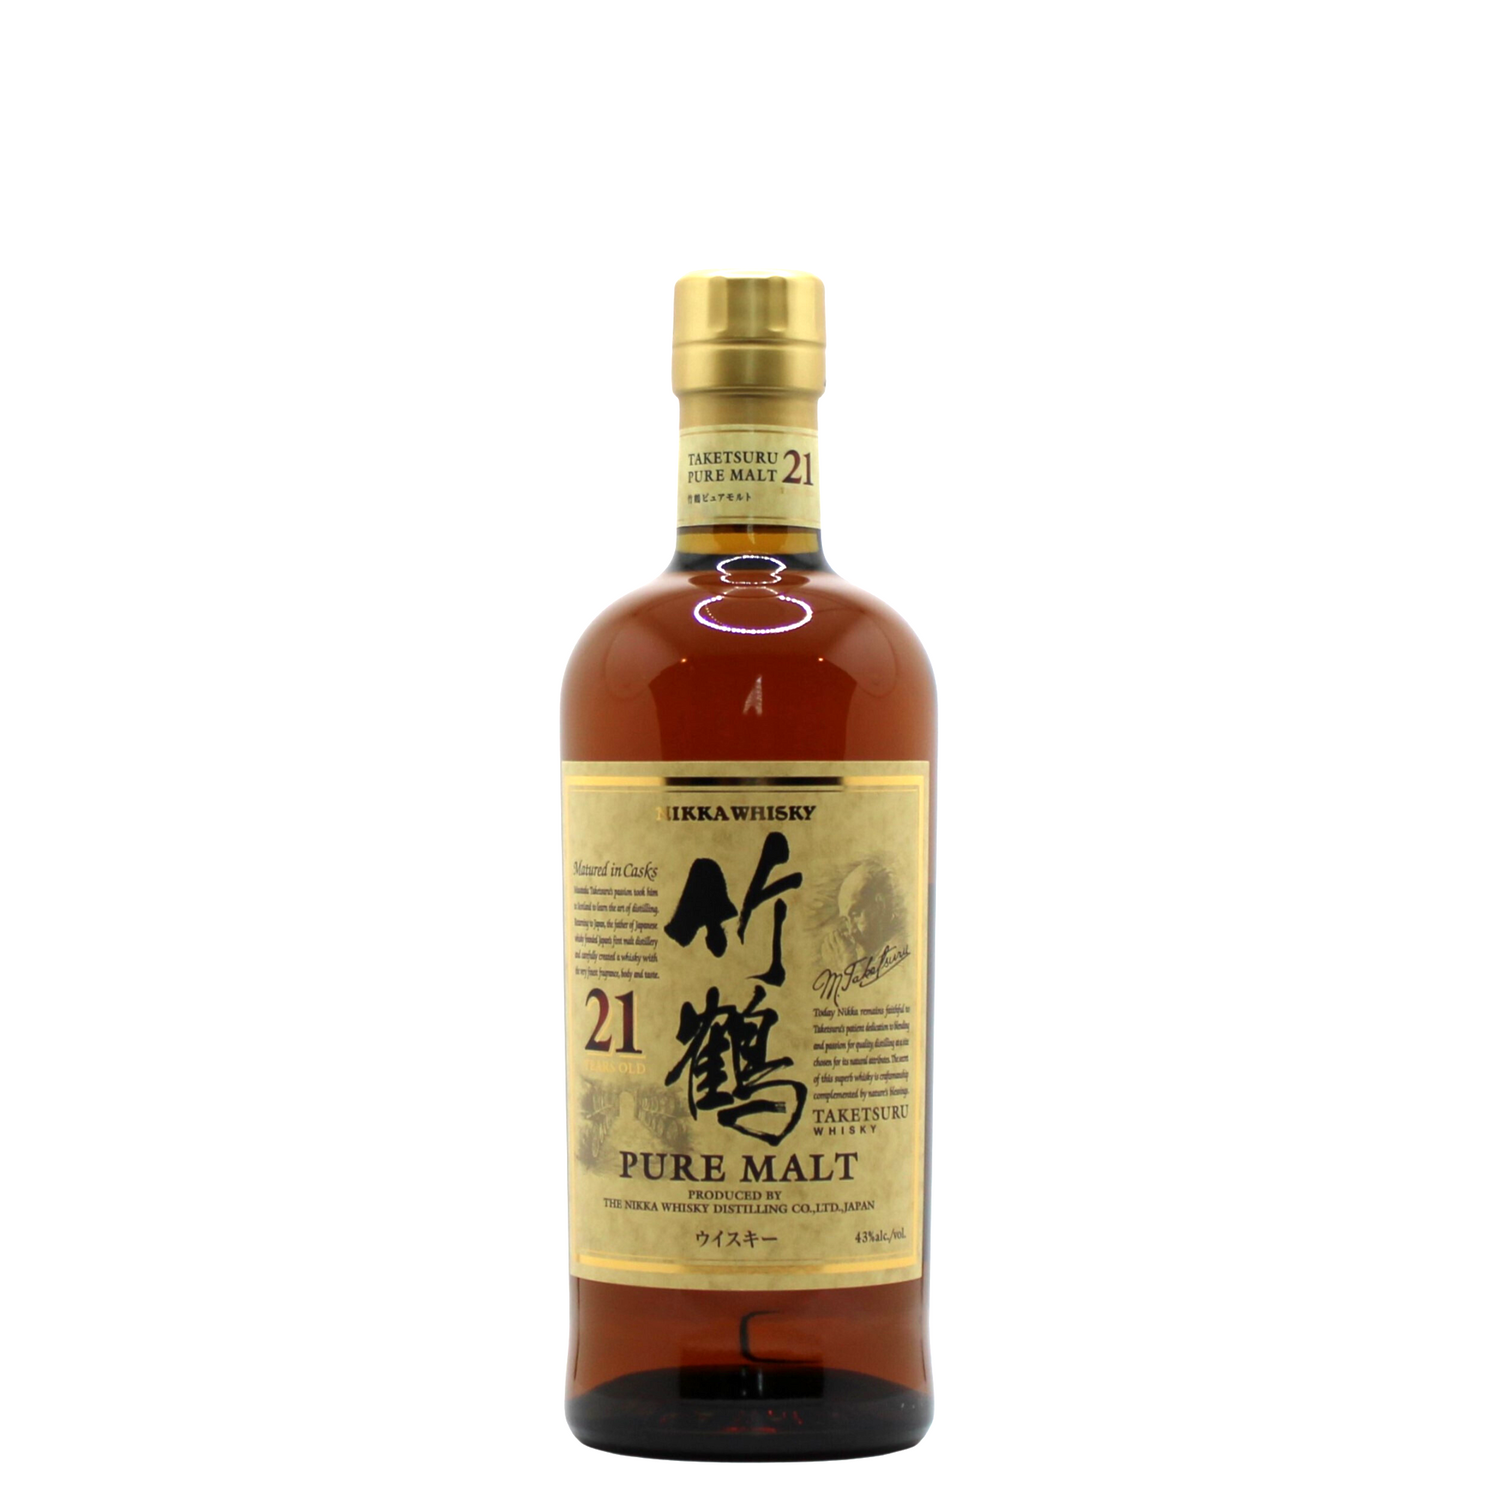 Highly acclaimed/award winning whisky (World's Best Blended Malt Whisky at 2010 WWA). Named after father of Japanese Whisky Mr Masataka Taketsuru. Sadly Discontinued now.